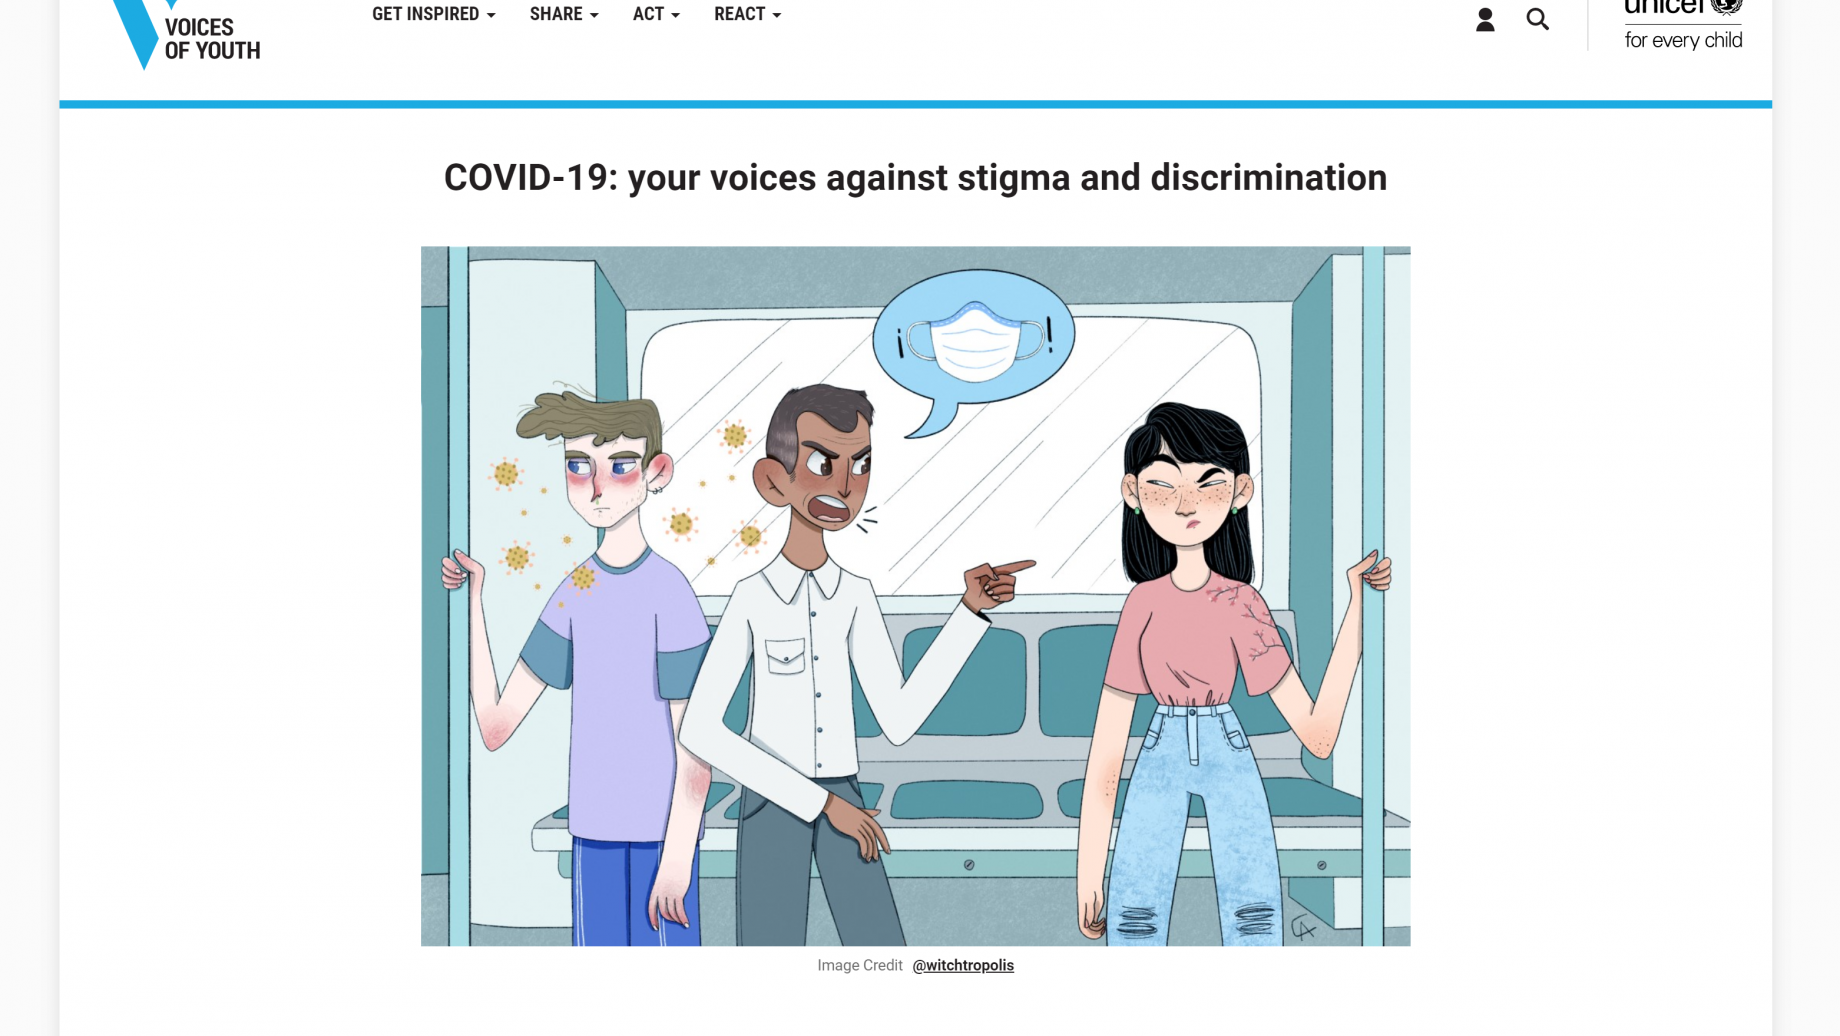 COVID-19: Your Voices Against Stigma and Discrimination. UNICEF